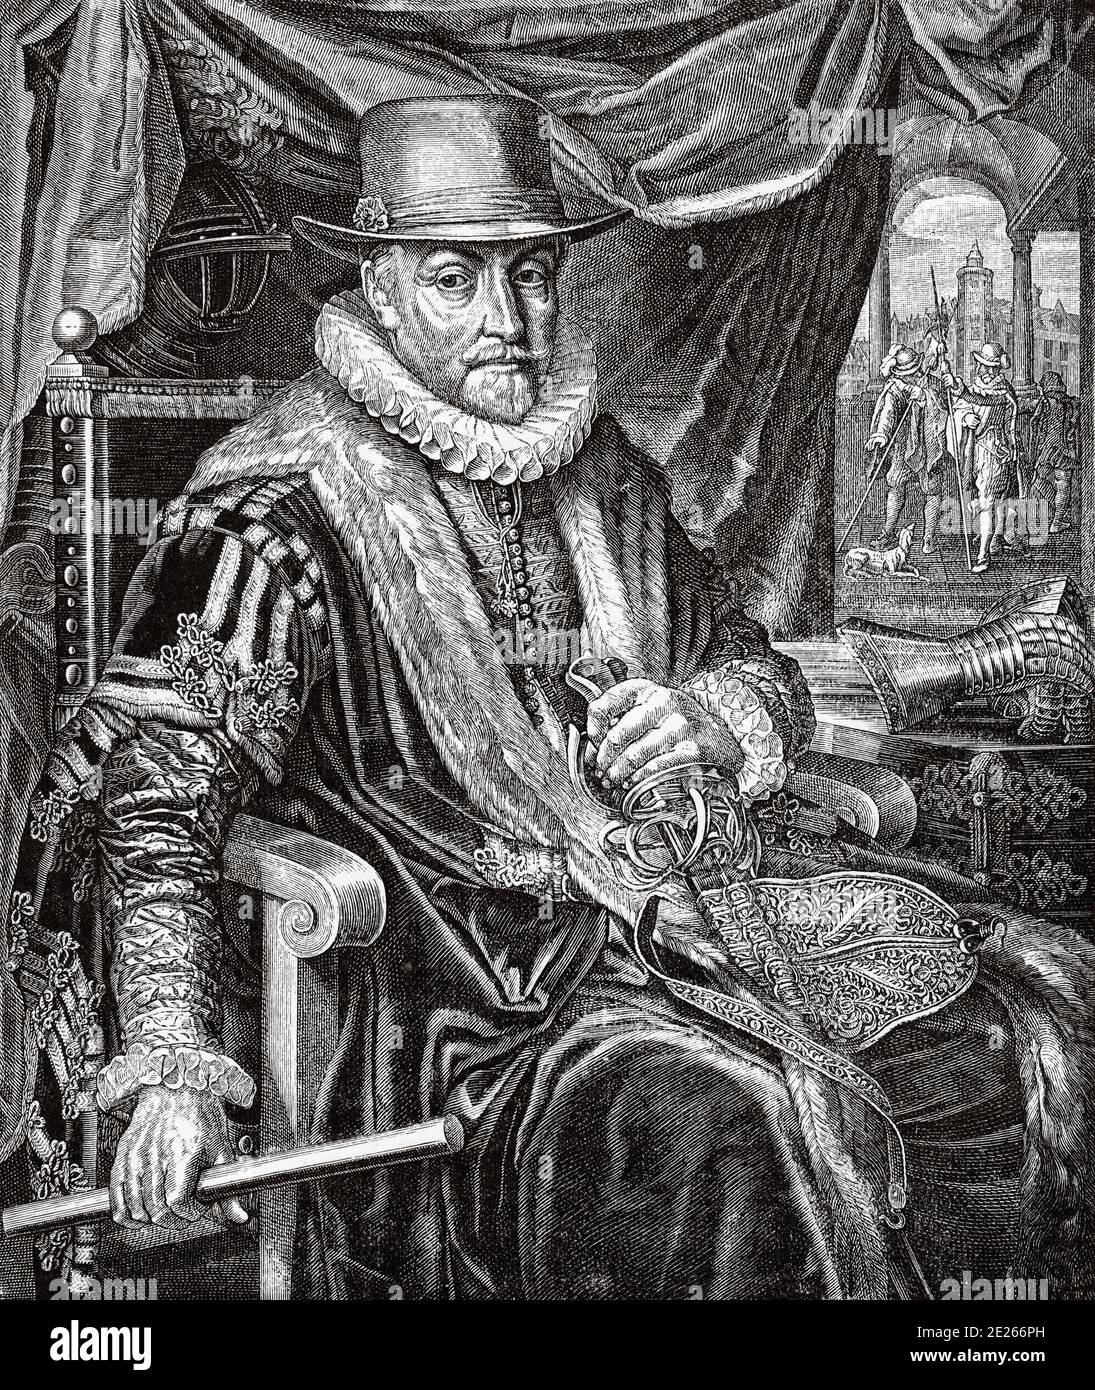 Portrait of William of Orange-Nassau. Willem van Oranje-Nassau (Dillenburg, Germany, April 4, 1533-Delft, July 10, 1584), called the Taciturn, was a member of the House of Nassau and became Prince of Orange in 1544. He joined the rebellion against the Spanish Crown. History of Philip II of Spain. Old engraving published in Historia de Felipe II by H. Forneron, in 1884 Stock Photo